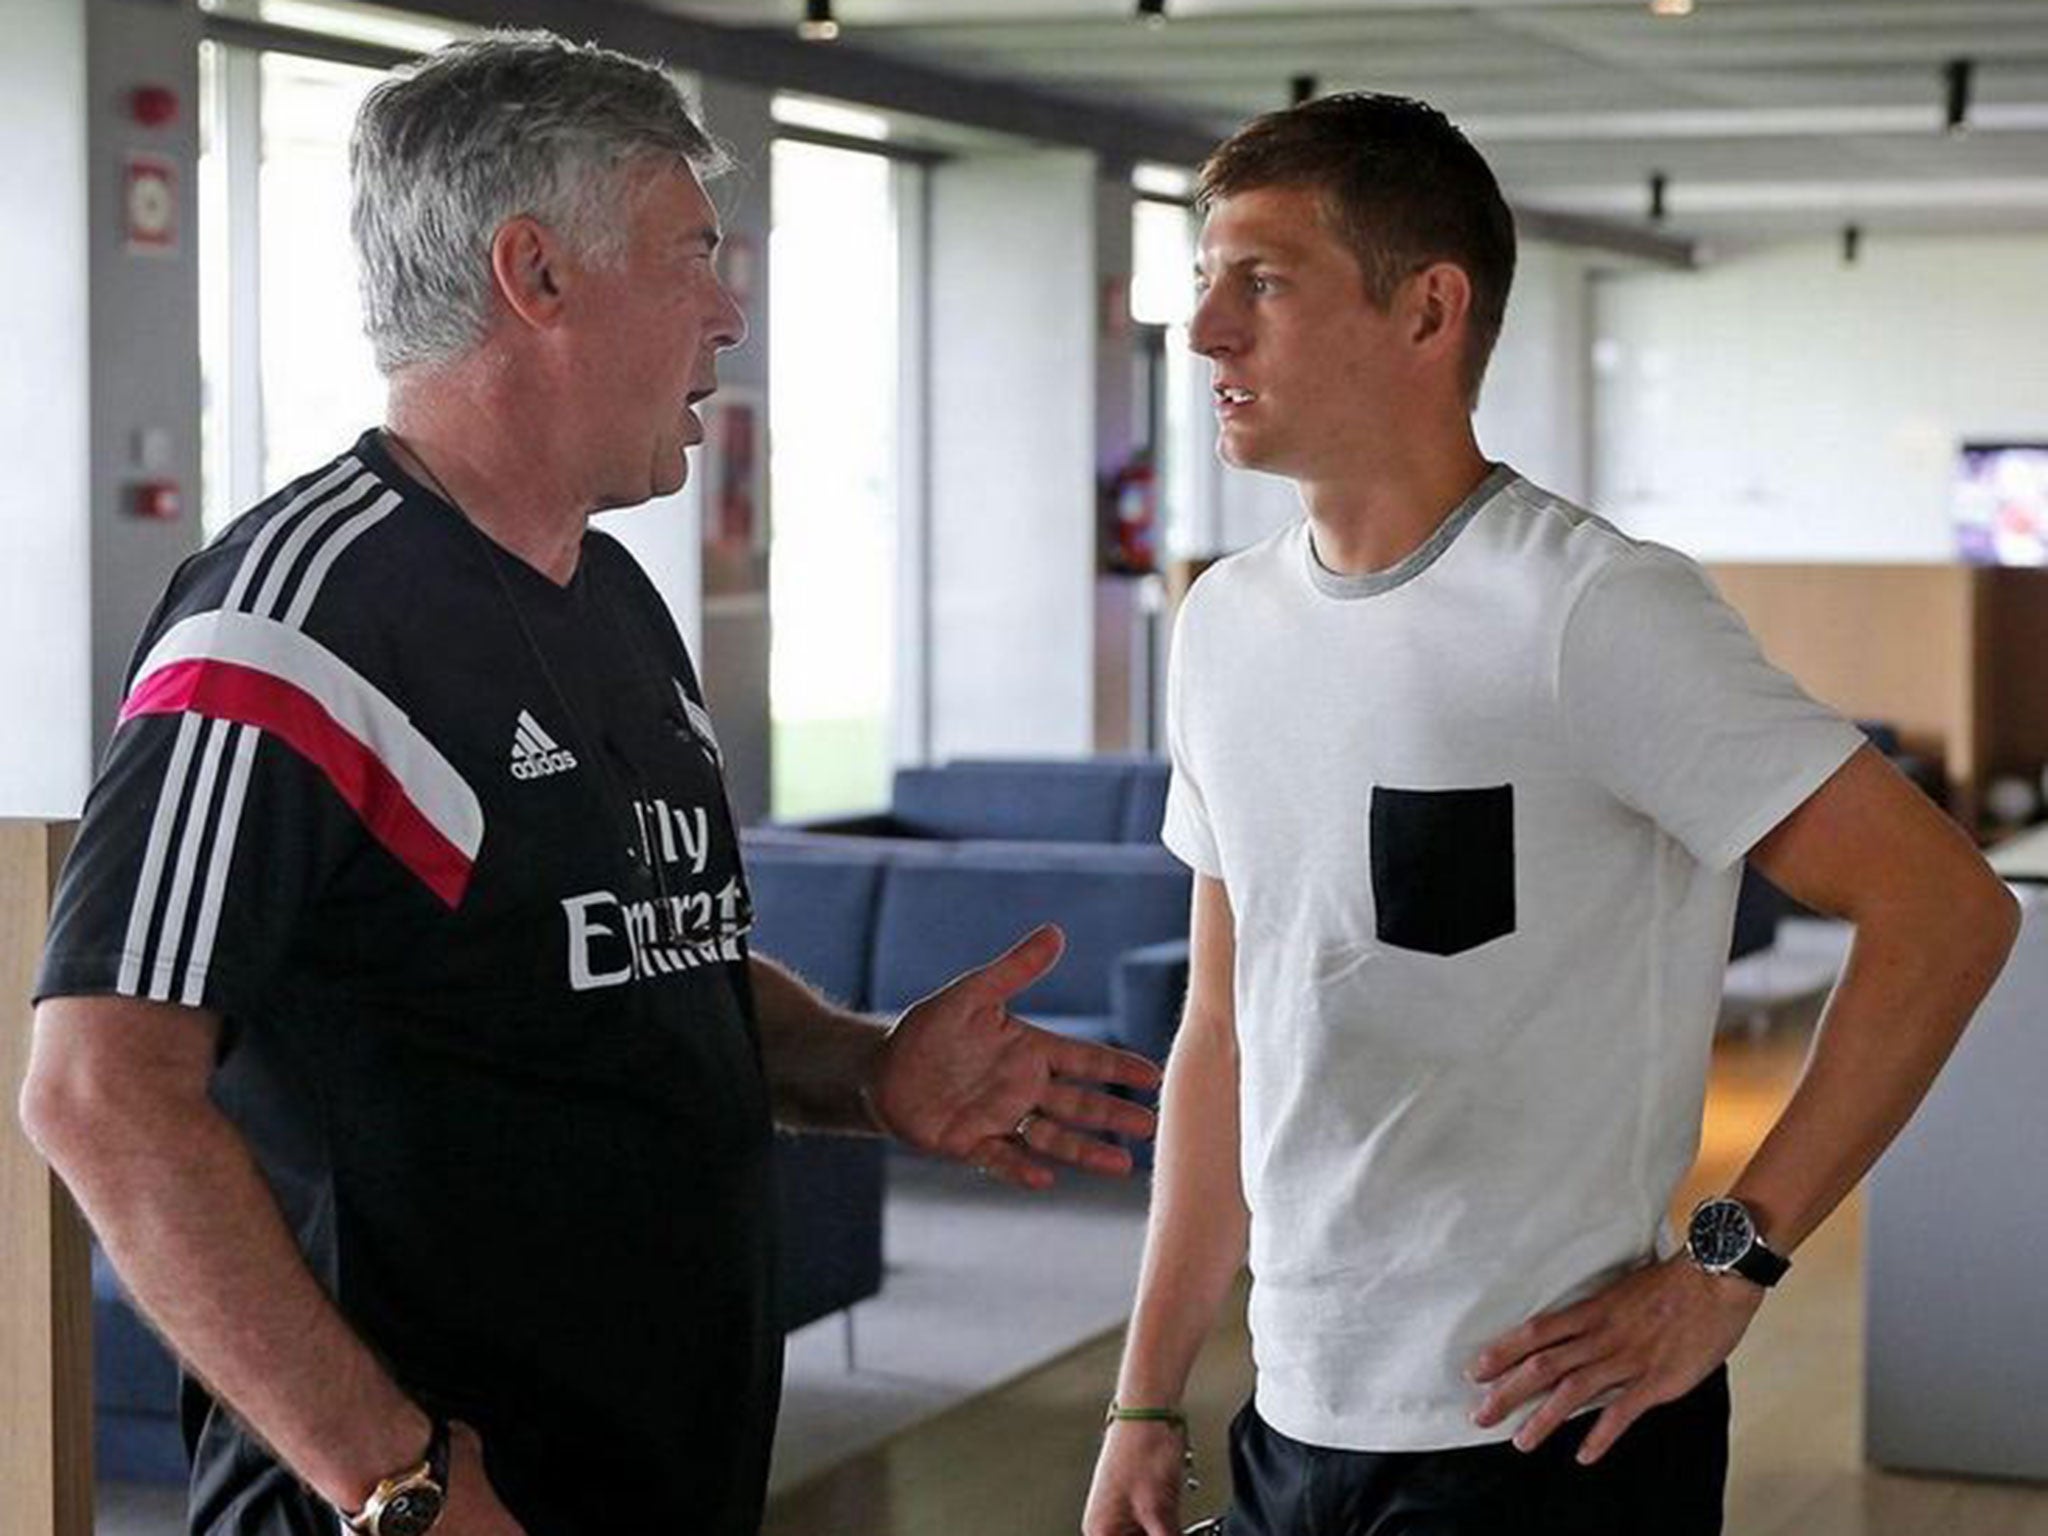 Toni Kroos has completed his move to Real Madrid - speaking to Los Blancos manager Carlo Ancelotti